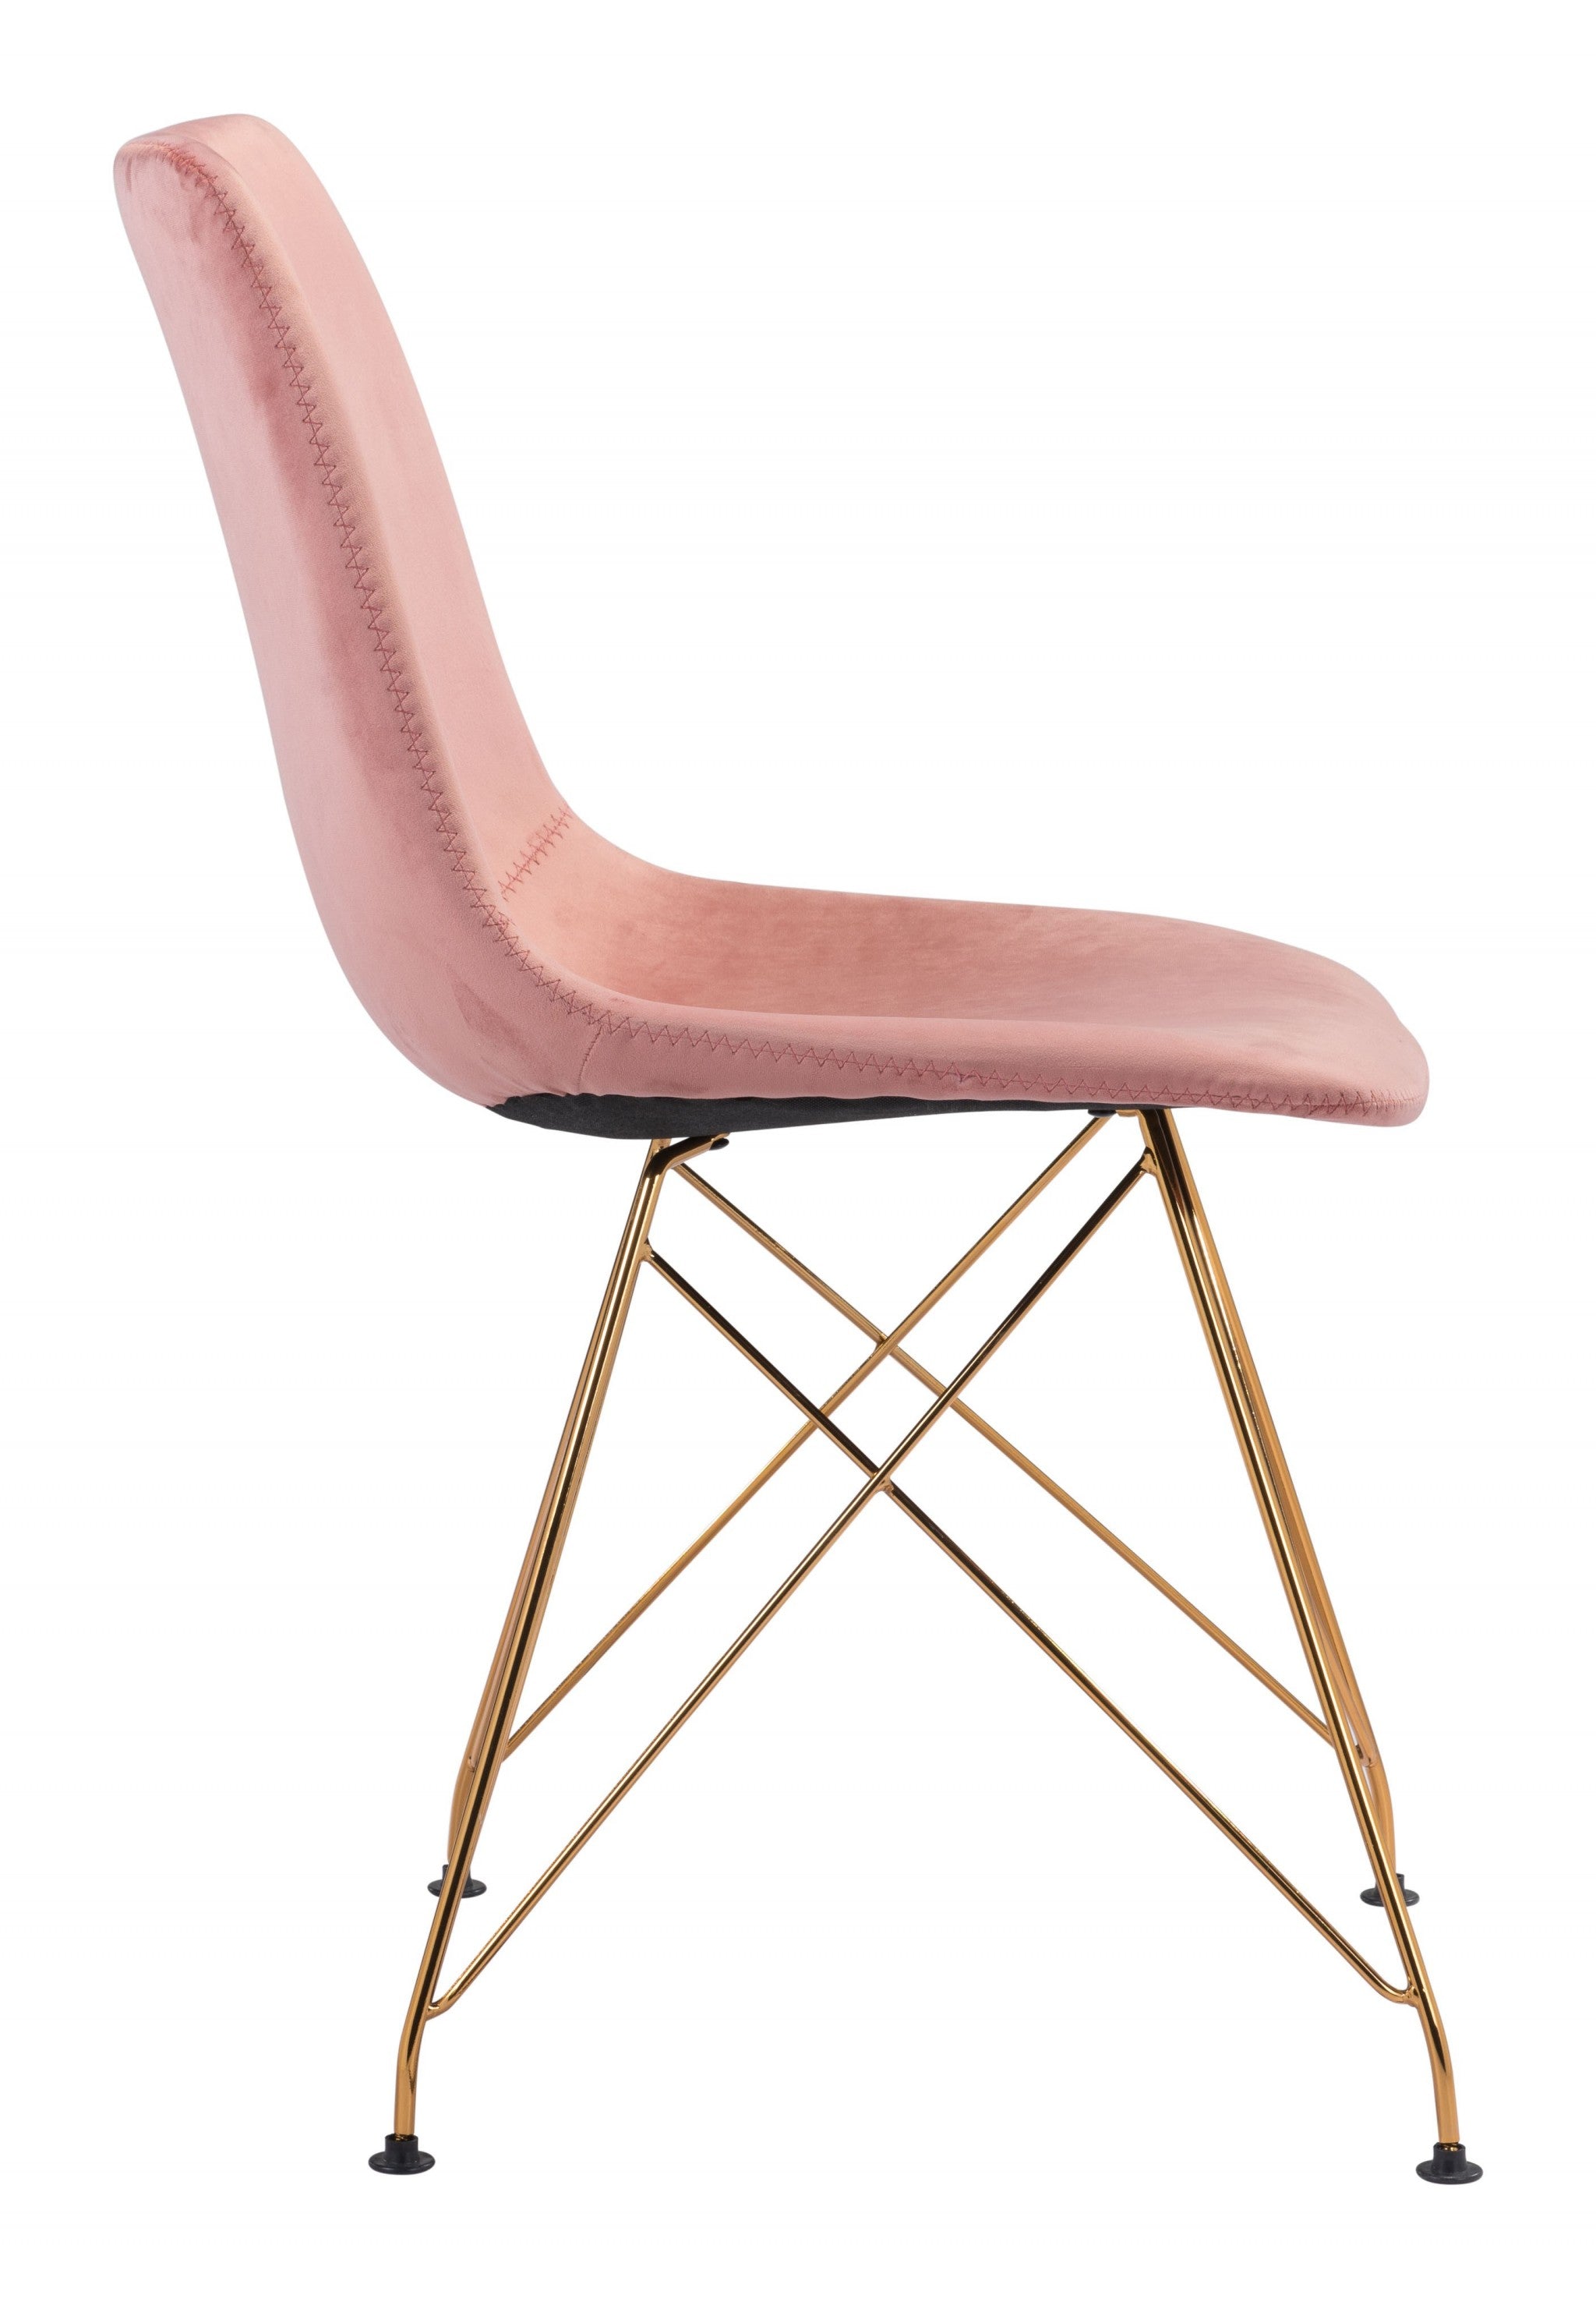 Set of Four Pink and Gold Upholstered Velvet Dining Side Chairs